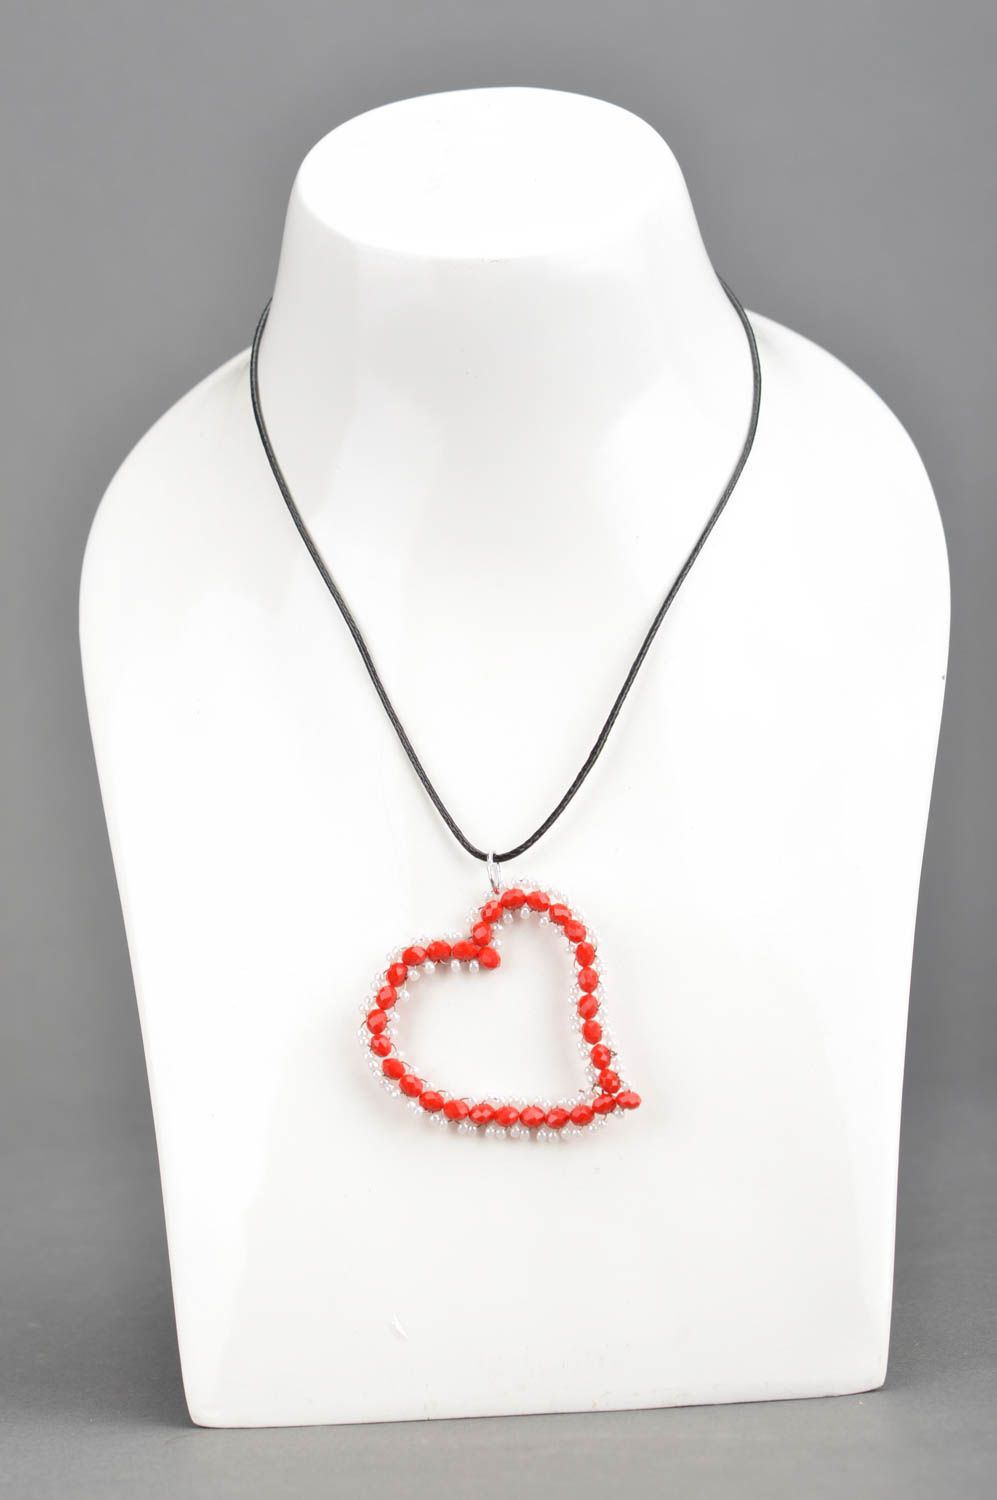 Handmade designer red heart shaped pendant with Czech crystal beads on cord photo 1